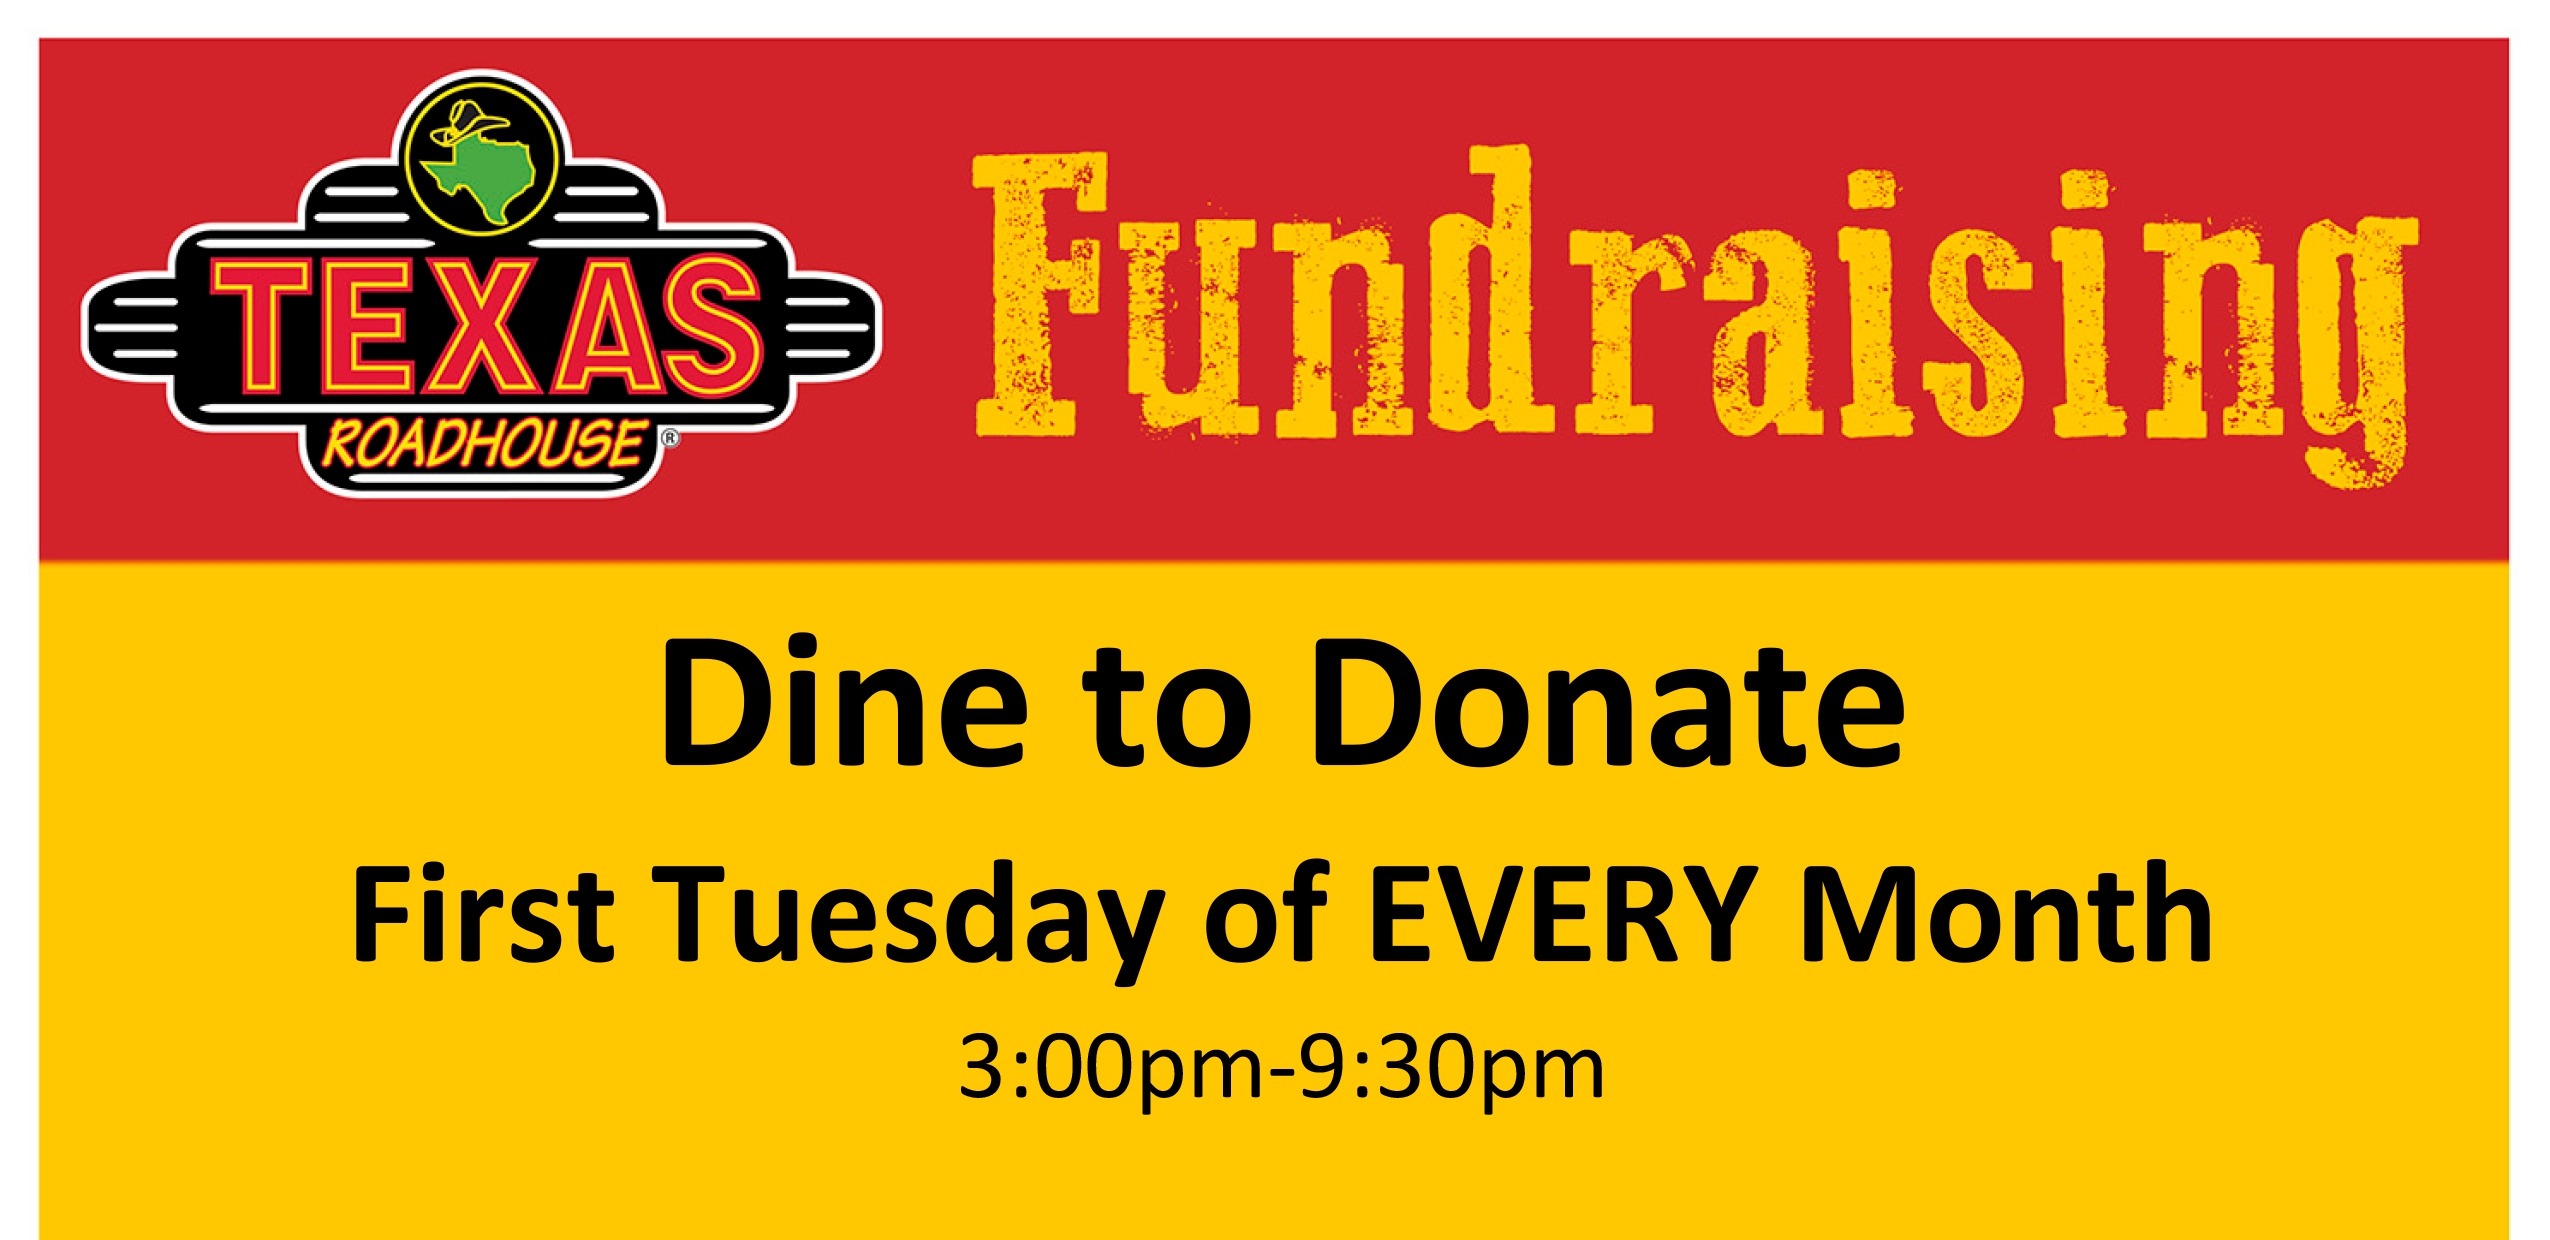 Dine to Donate at Texas Roadhouse in Lady Lake!